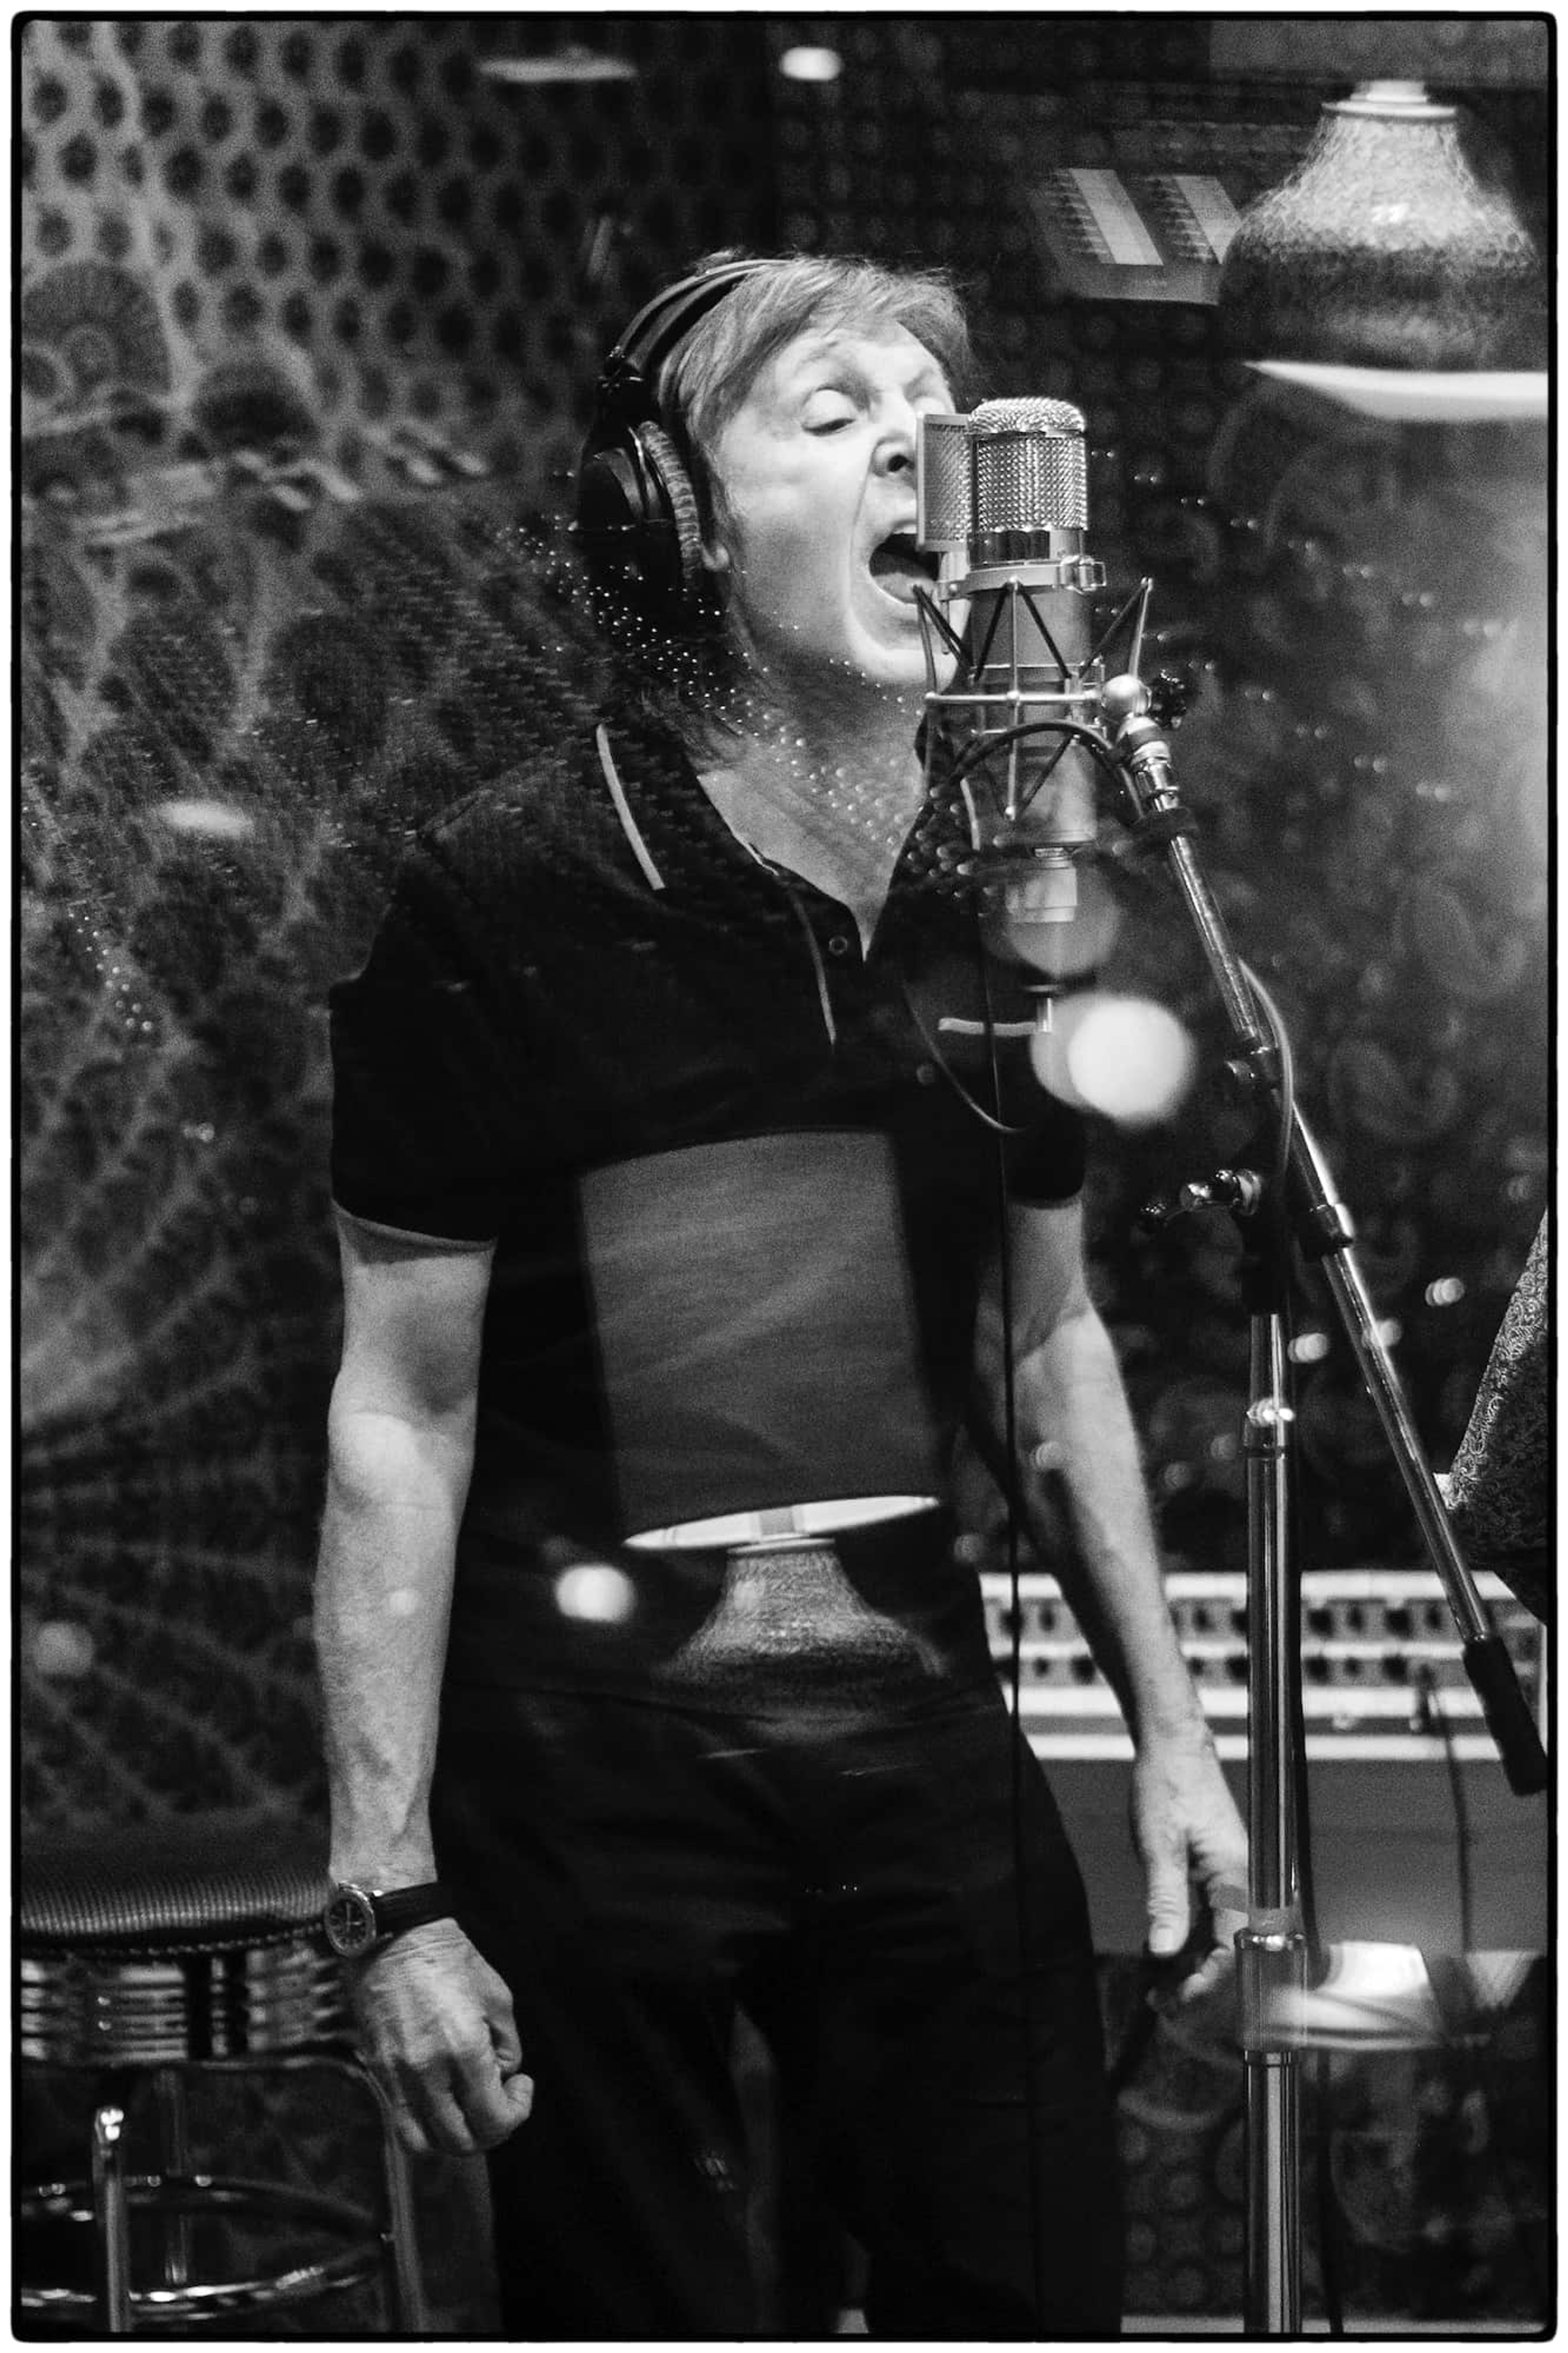 Photo of Paul at the microphone stand at Henson Studios in LA